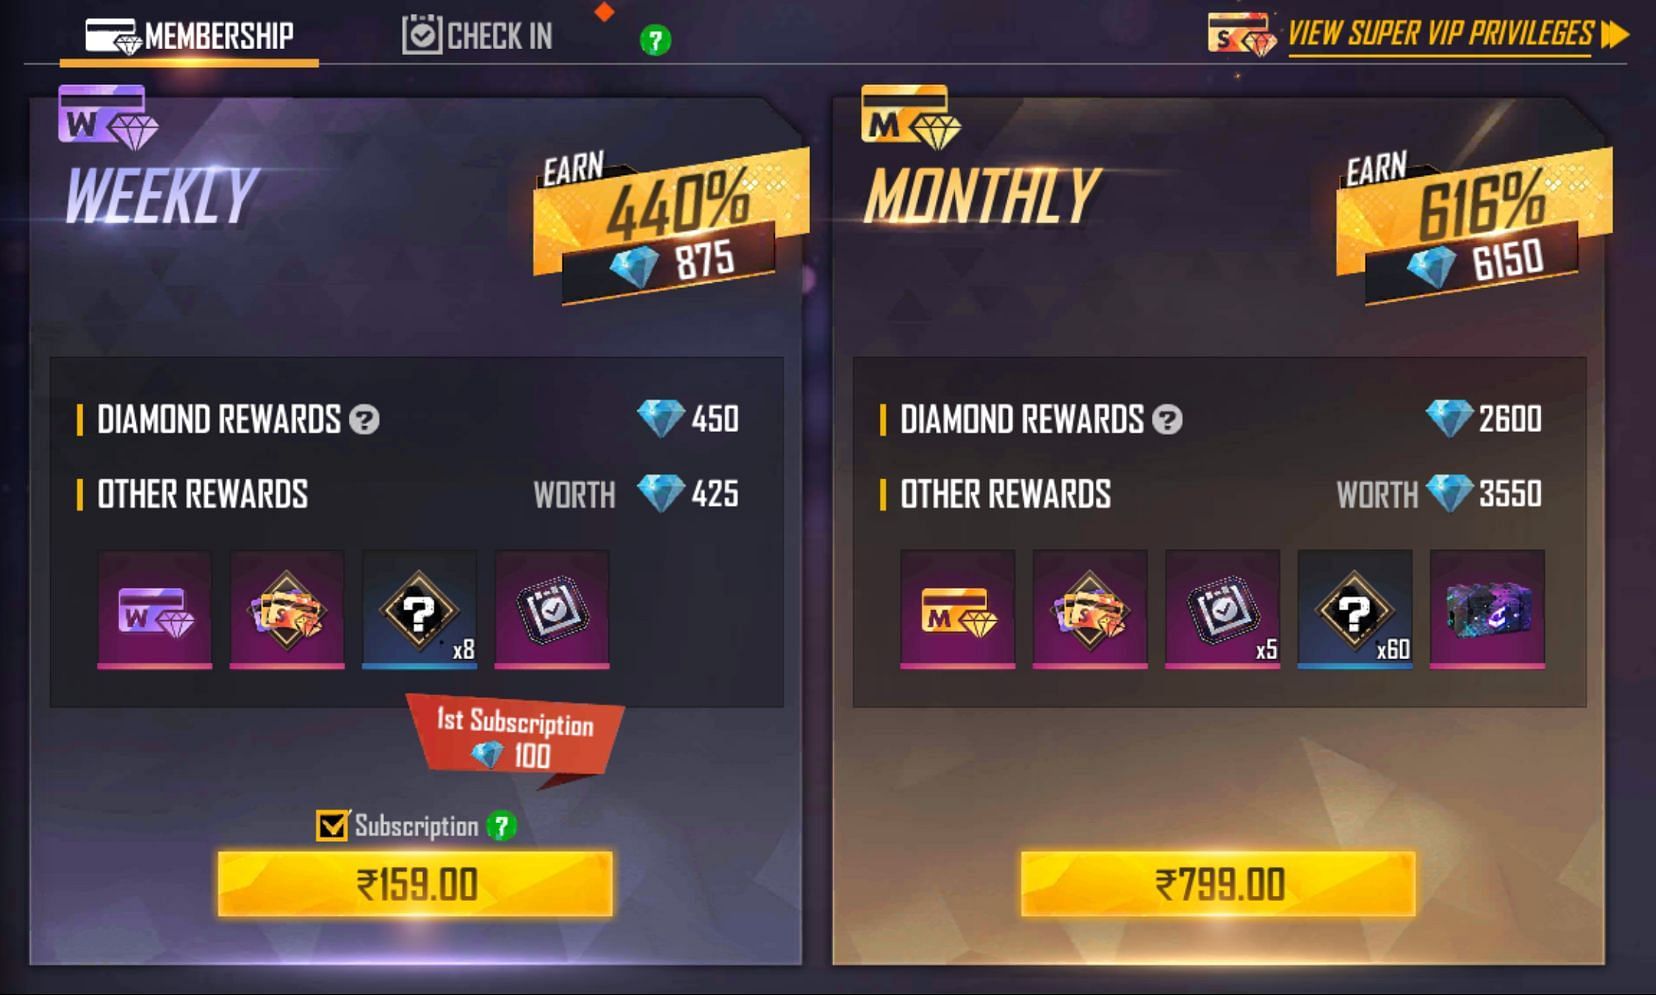 There are two types of membership (Image via Garena)